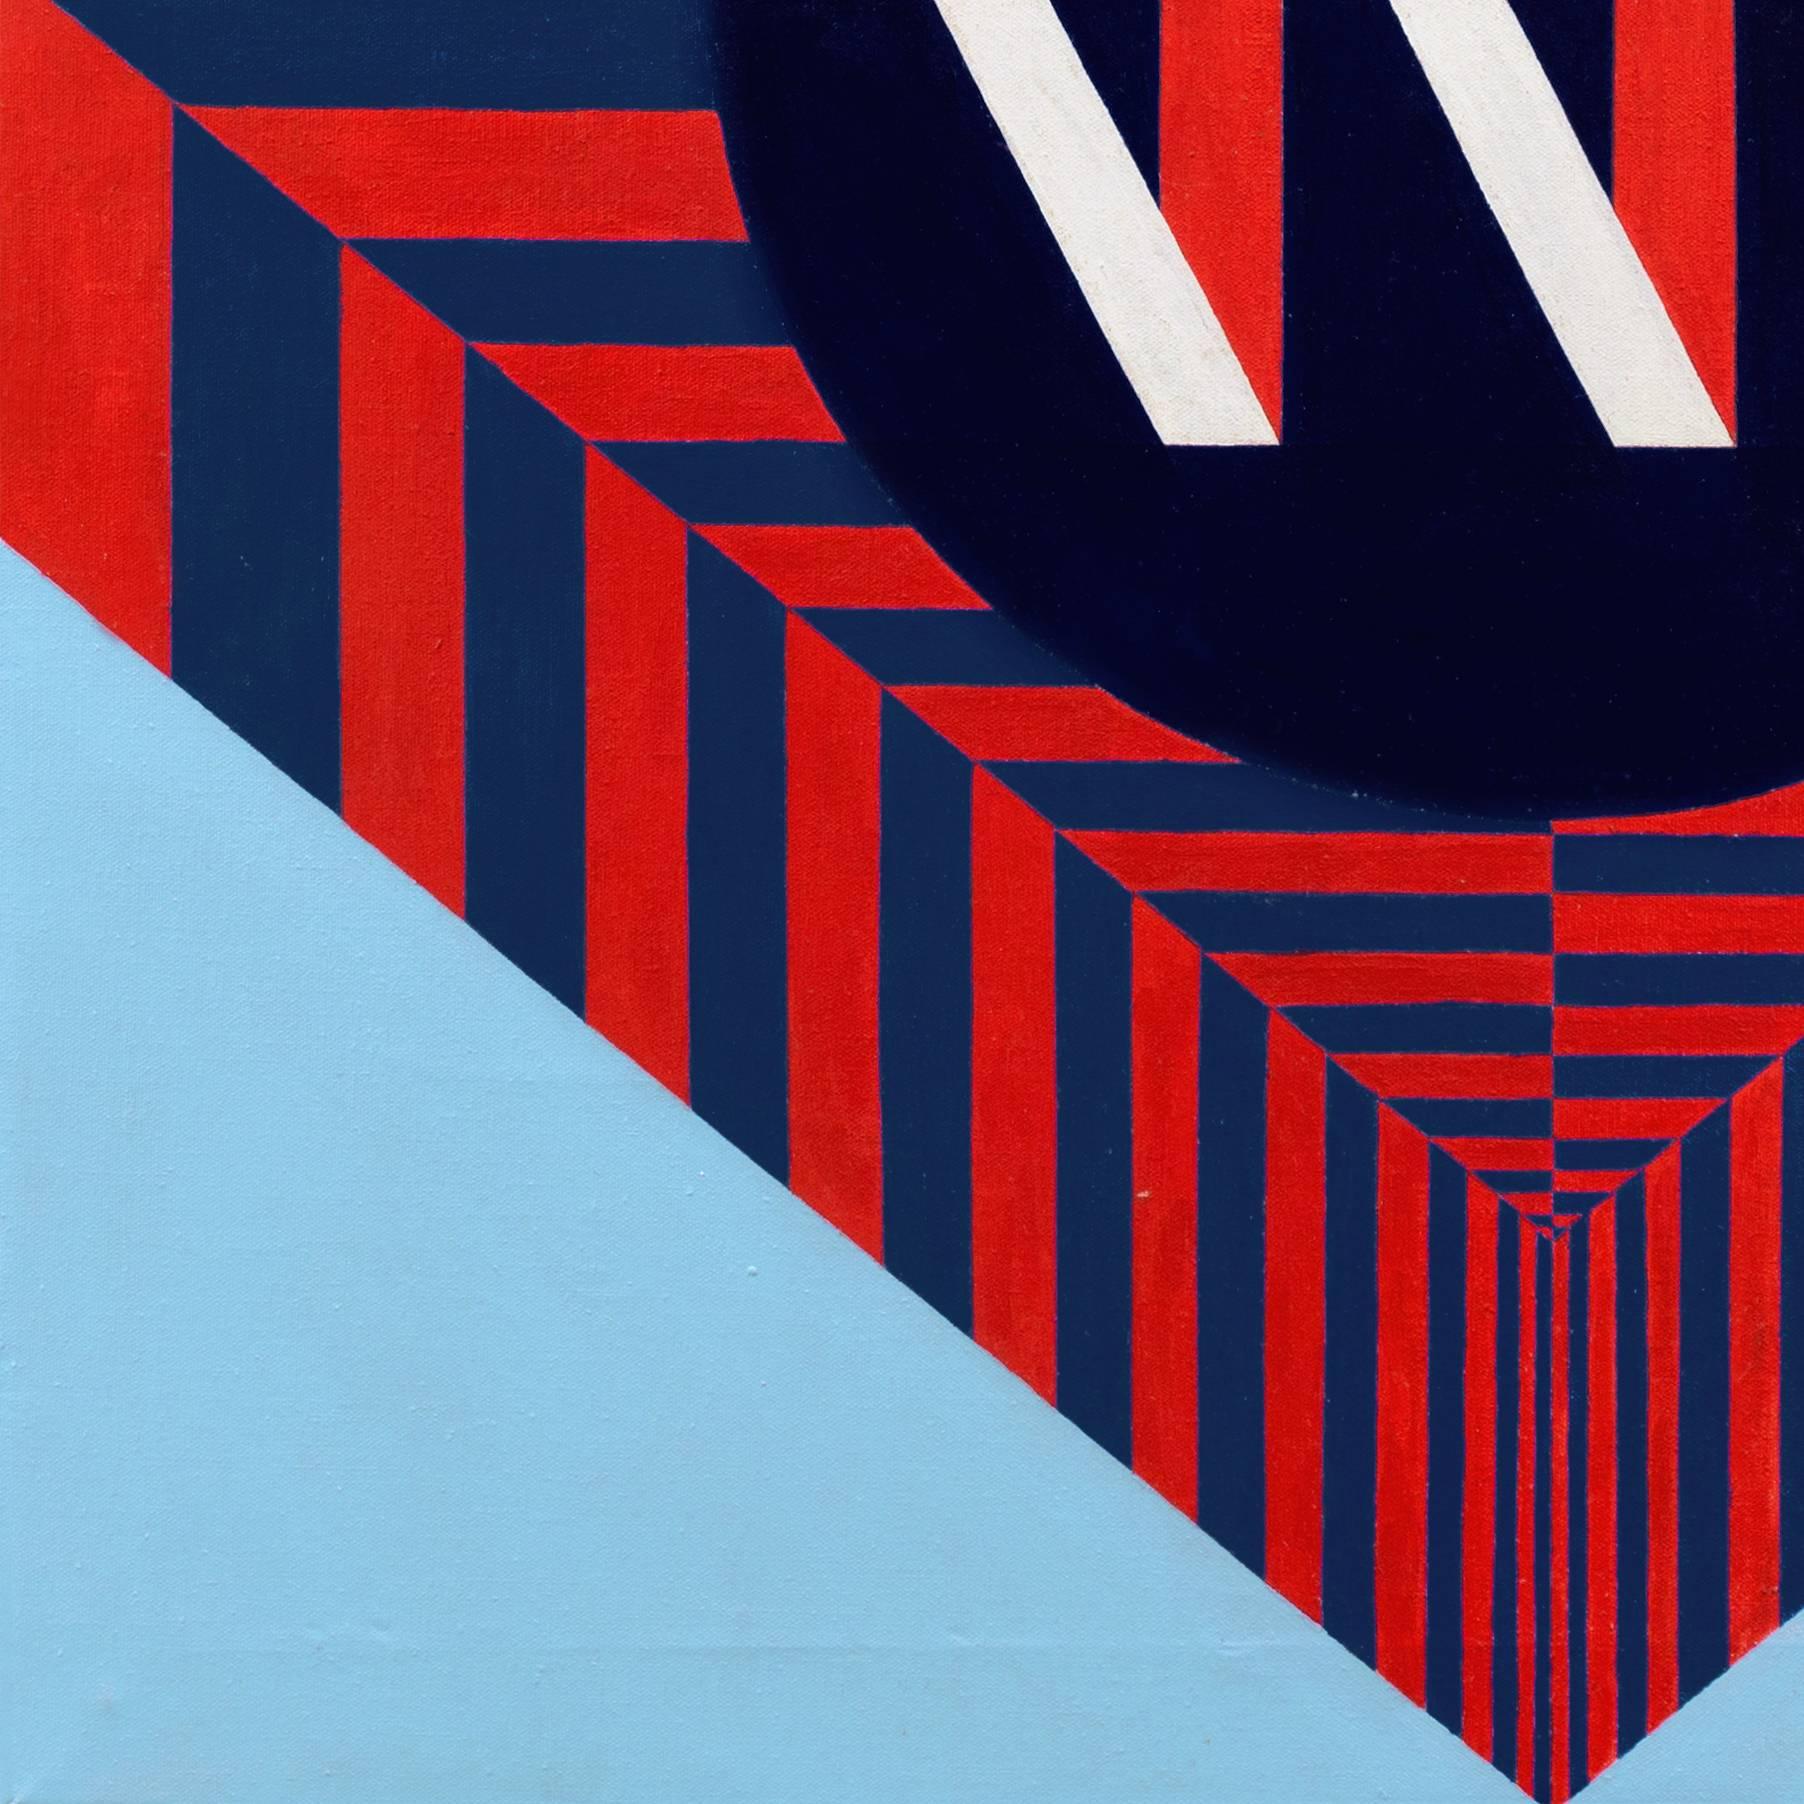 American School, Pop Art oil on canvas, unsigned and painted circa 1970.

A substantial and period, geometric Pop-Art abstract comprising red, white, and navy linear elements contrasted against a sky-blue field, with rows of white stars against a